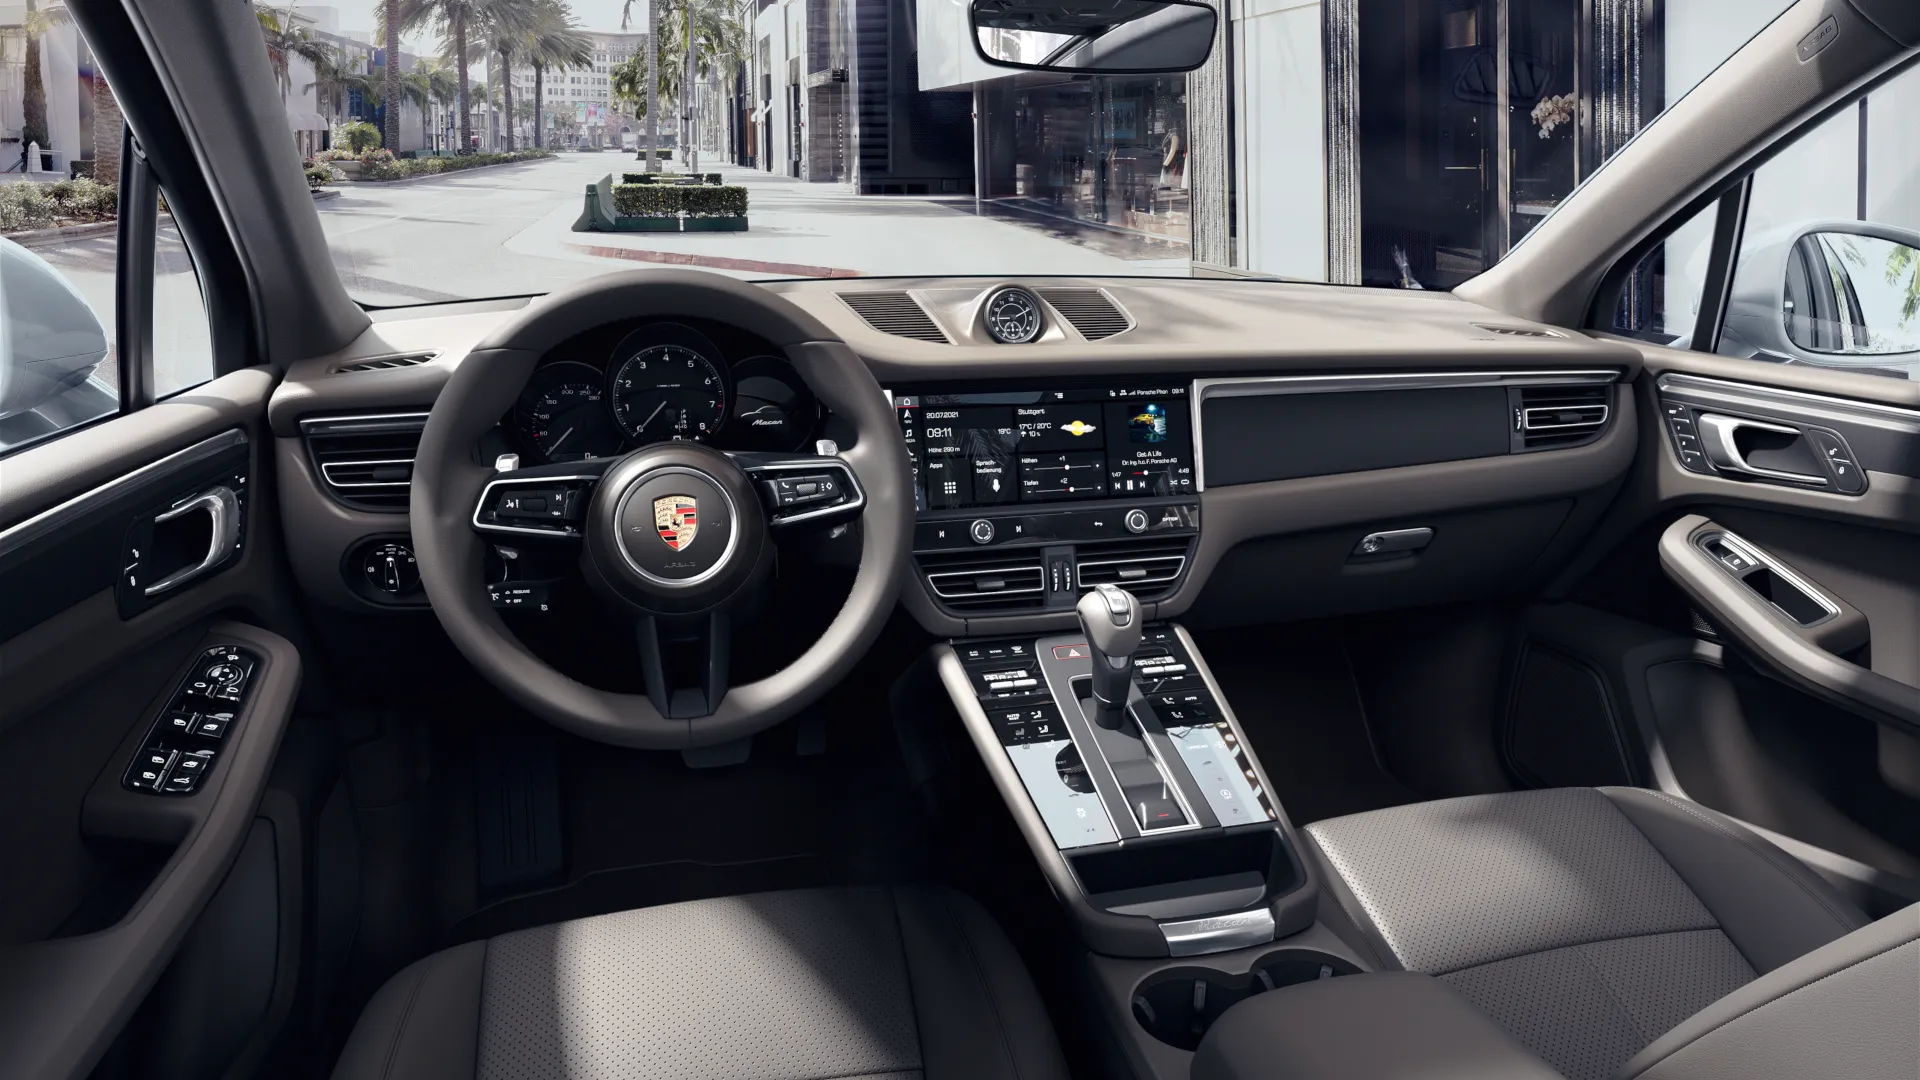 Interior view of Macan